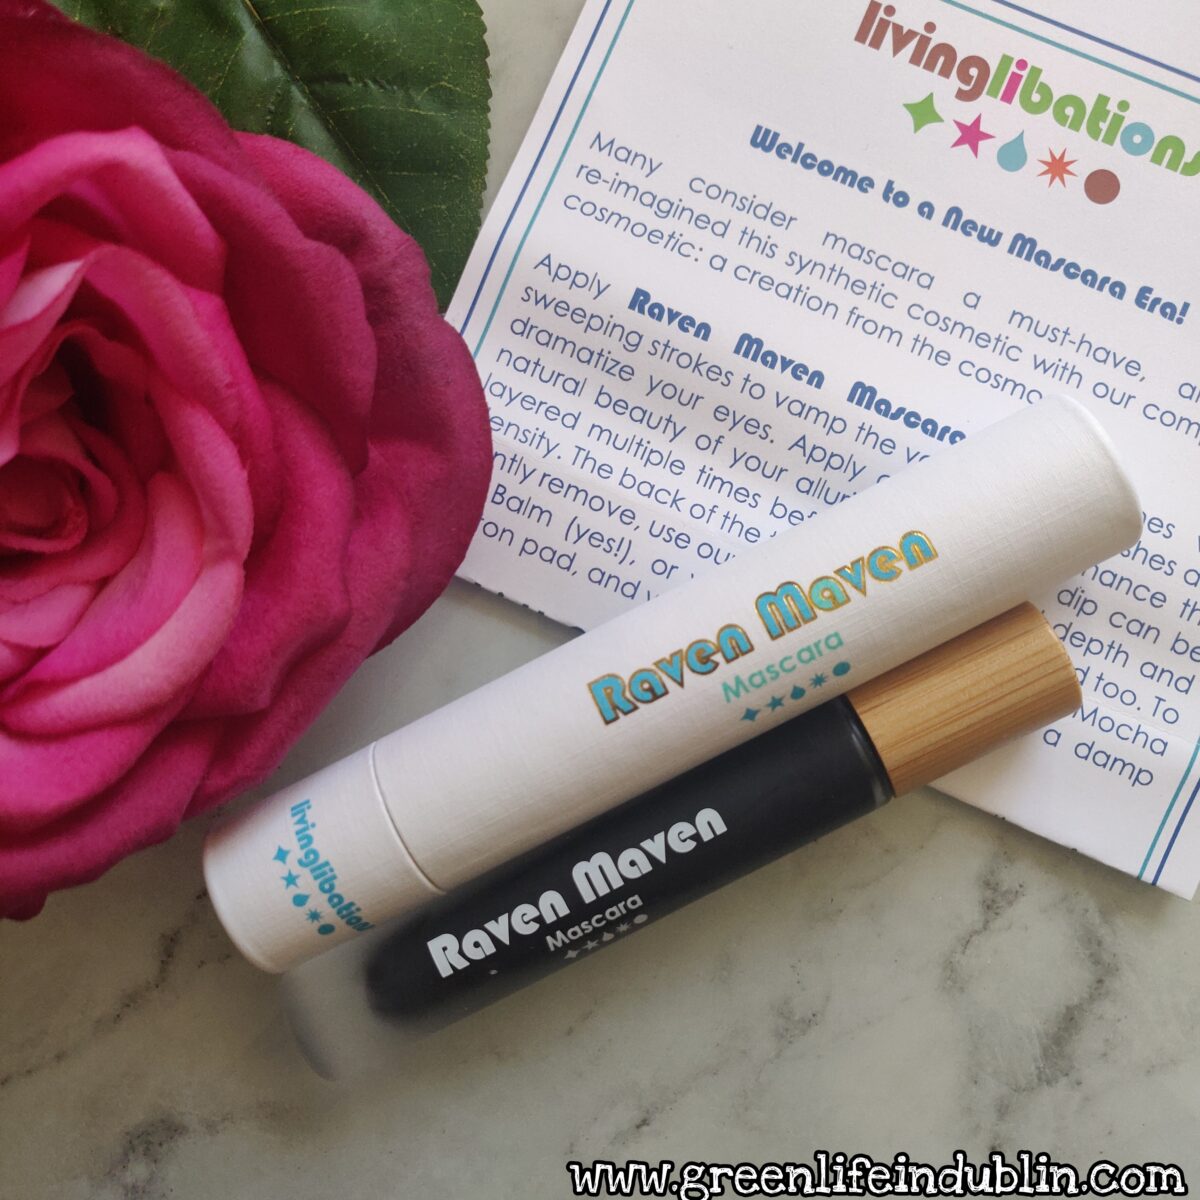 Living Libations Raven Maven Mascara first impressions review - Green Life In Dublin